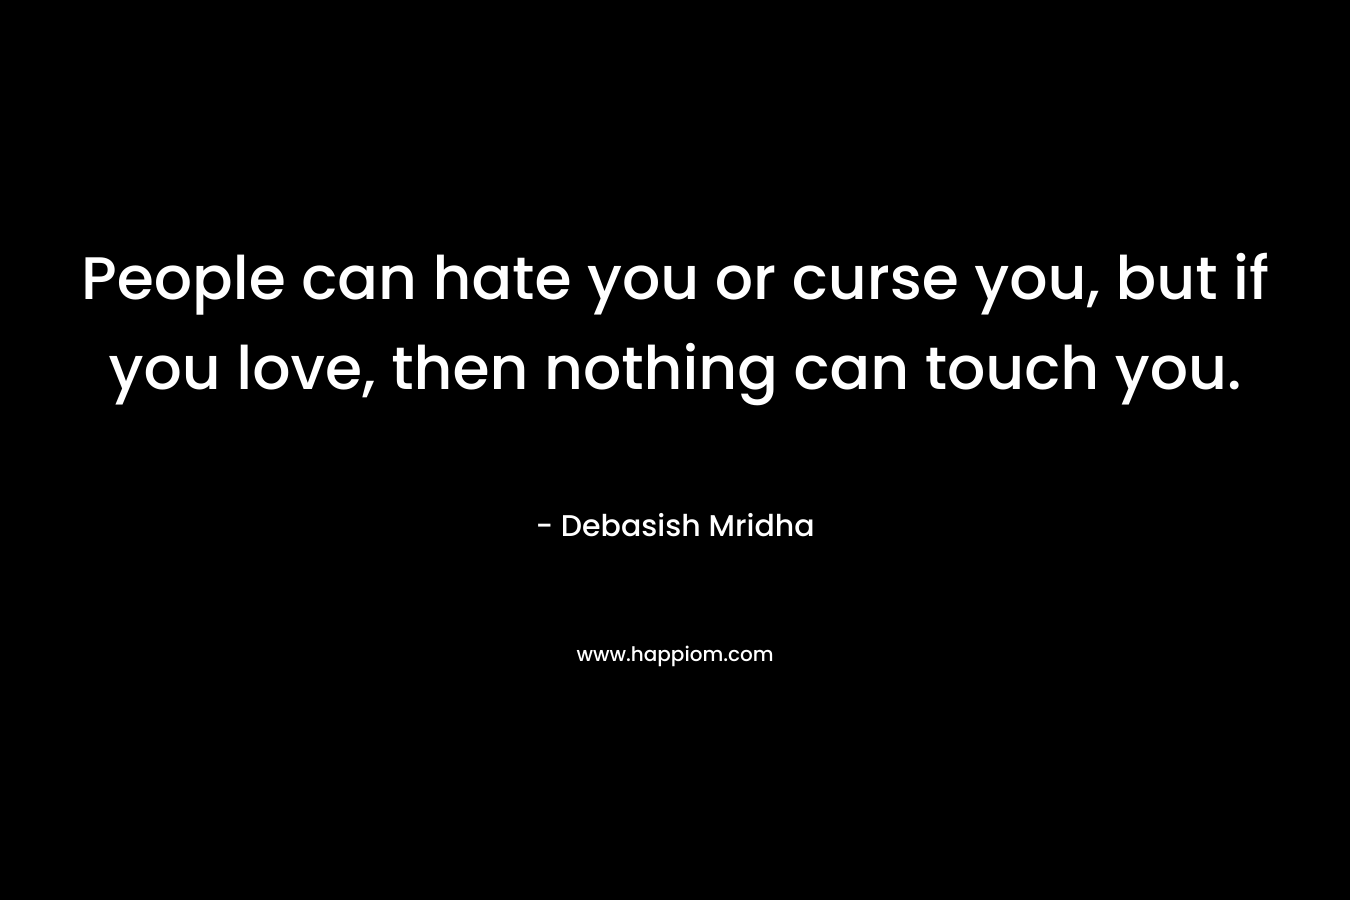 People can hate you or curse you, but if you love, then nothing can touch you.